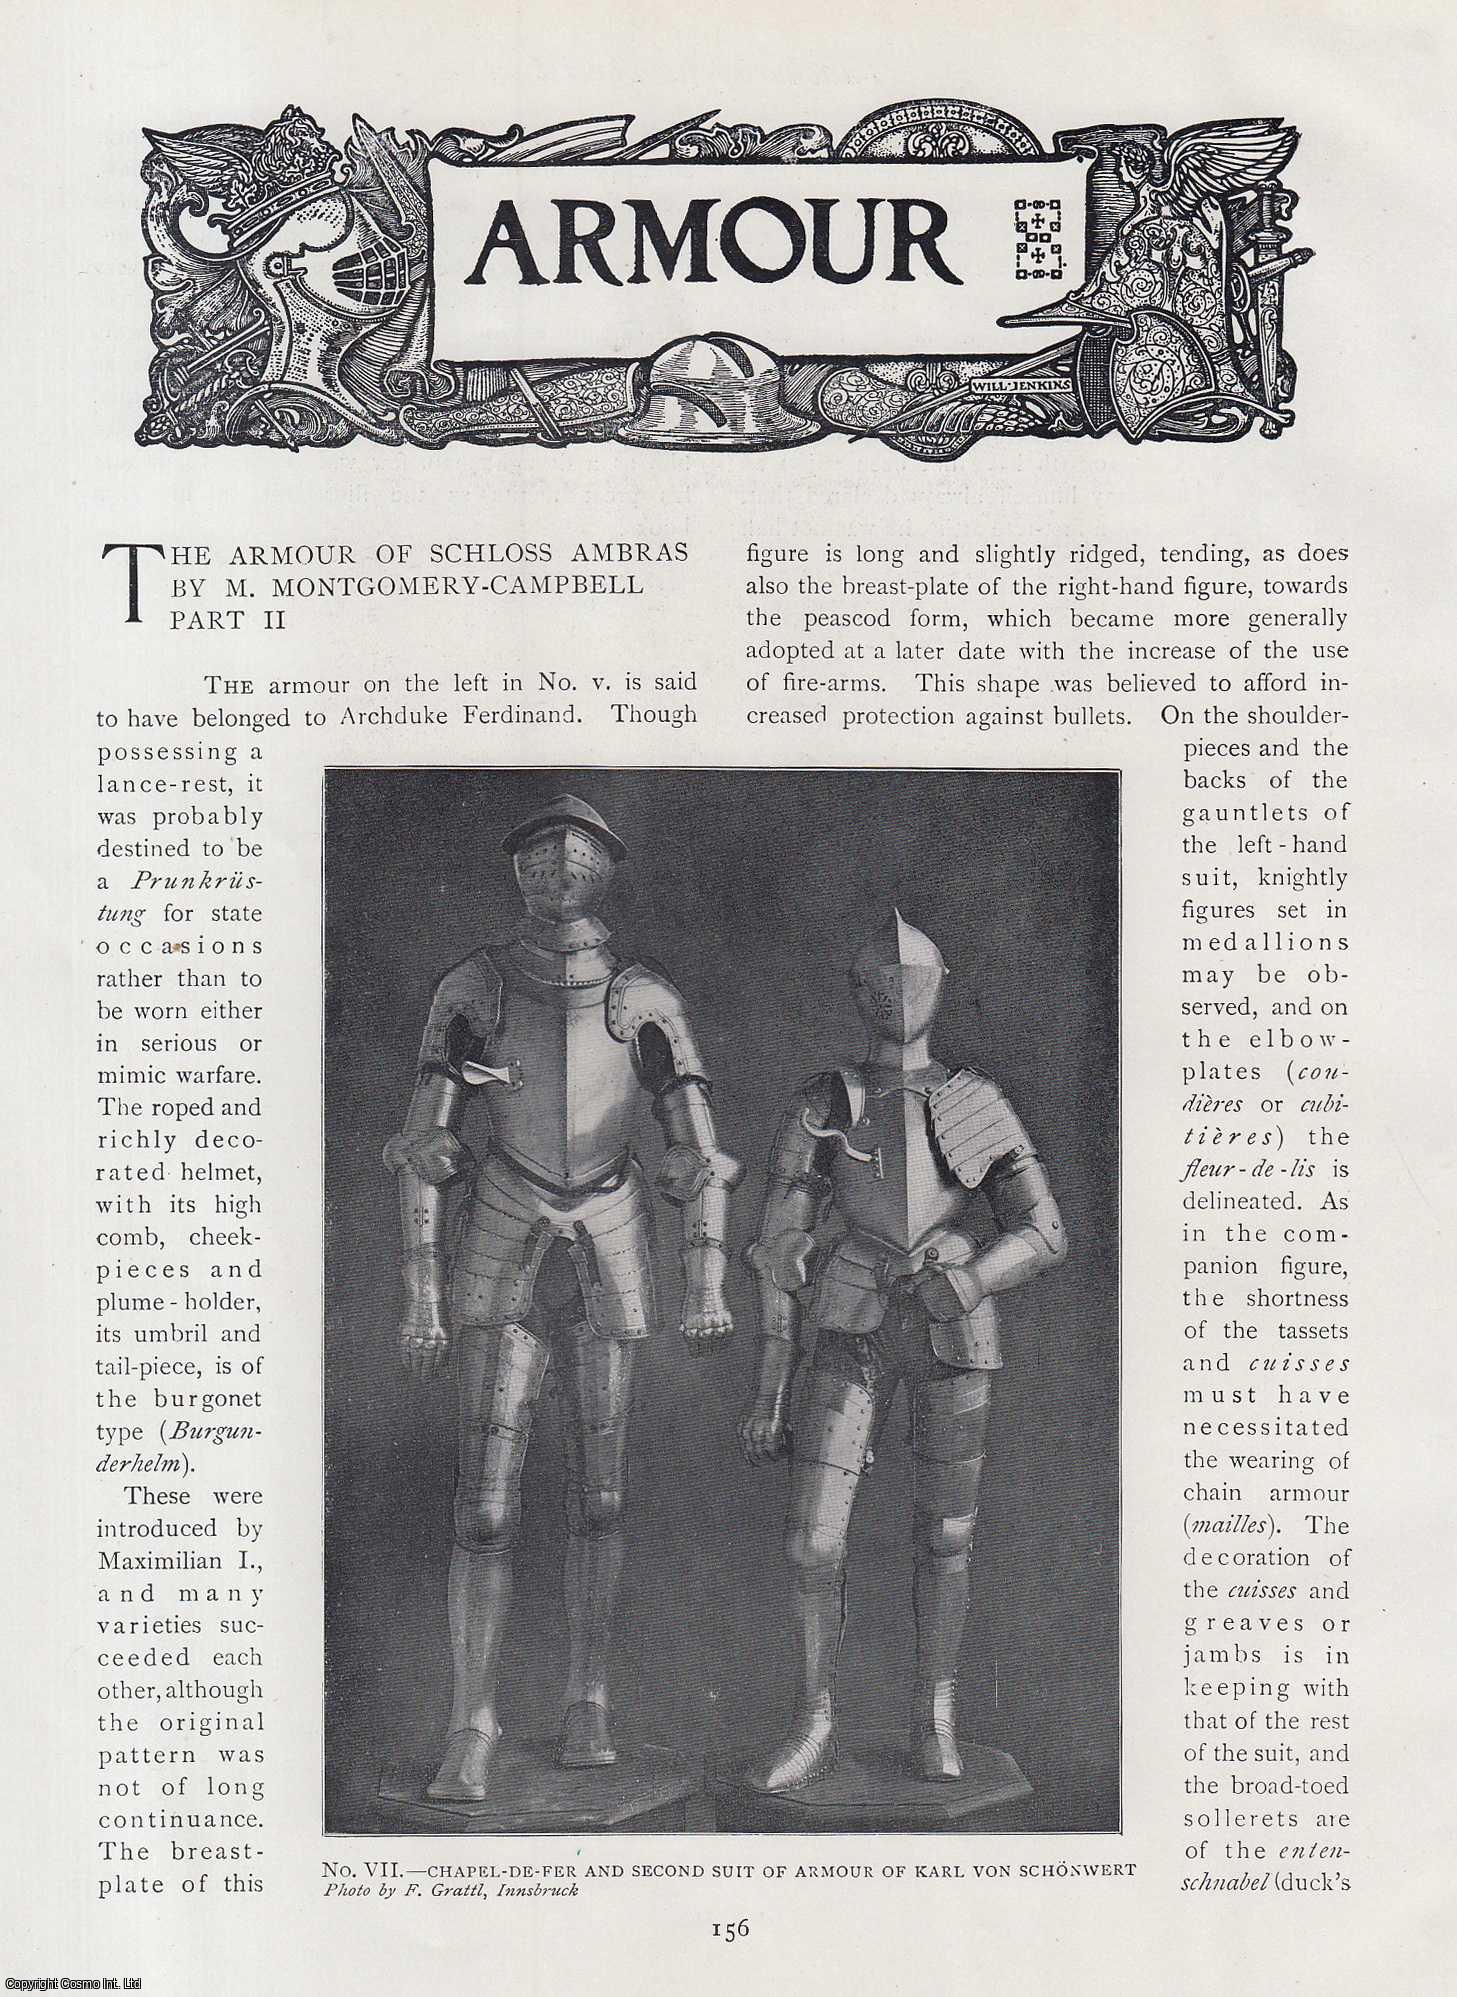 M. Montgomery-Campbell - The Armour of Schloss Ambras (part 2). An original article from The Connoisseur, 1904.